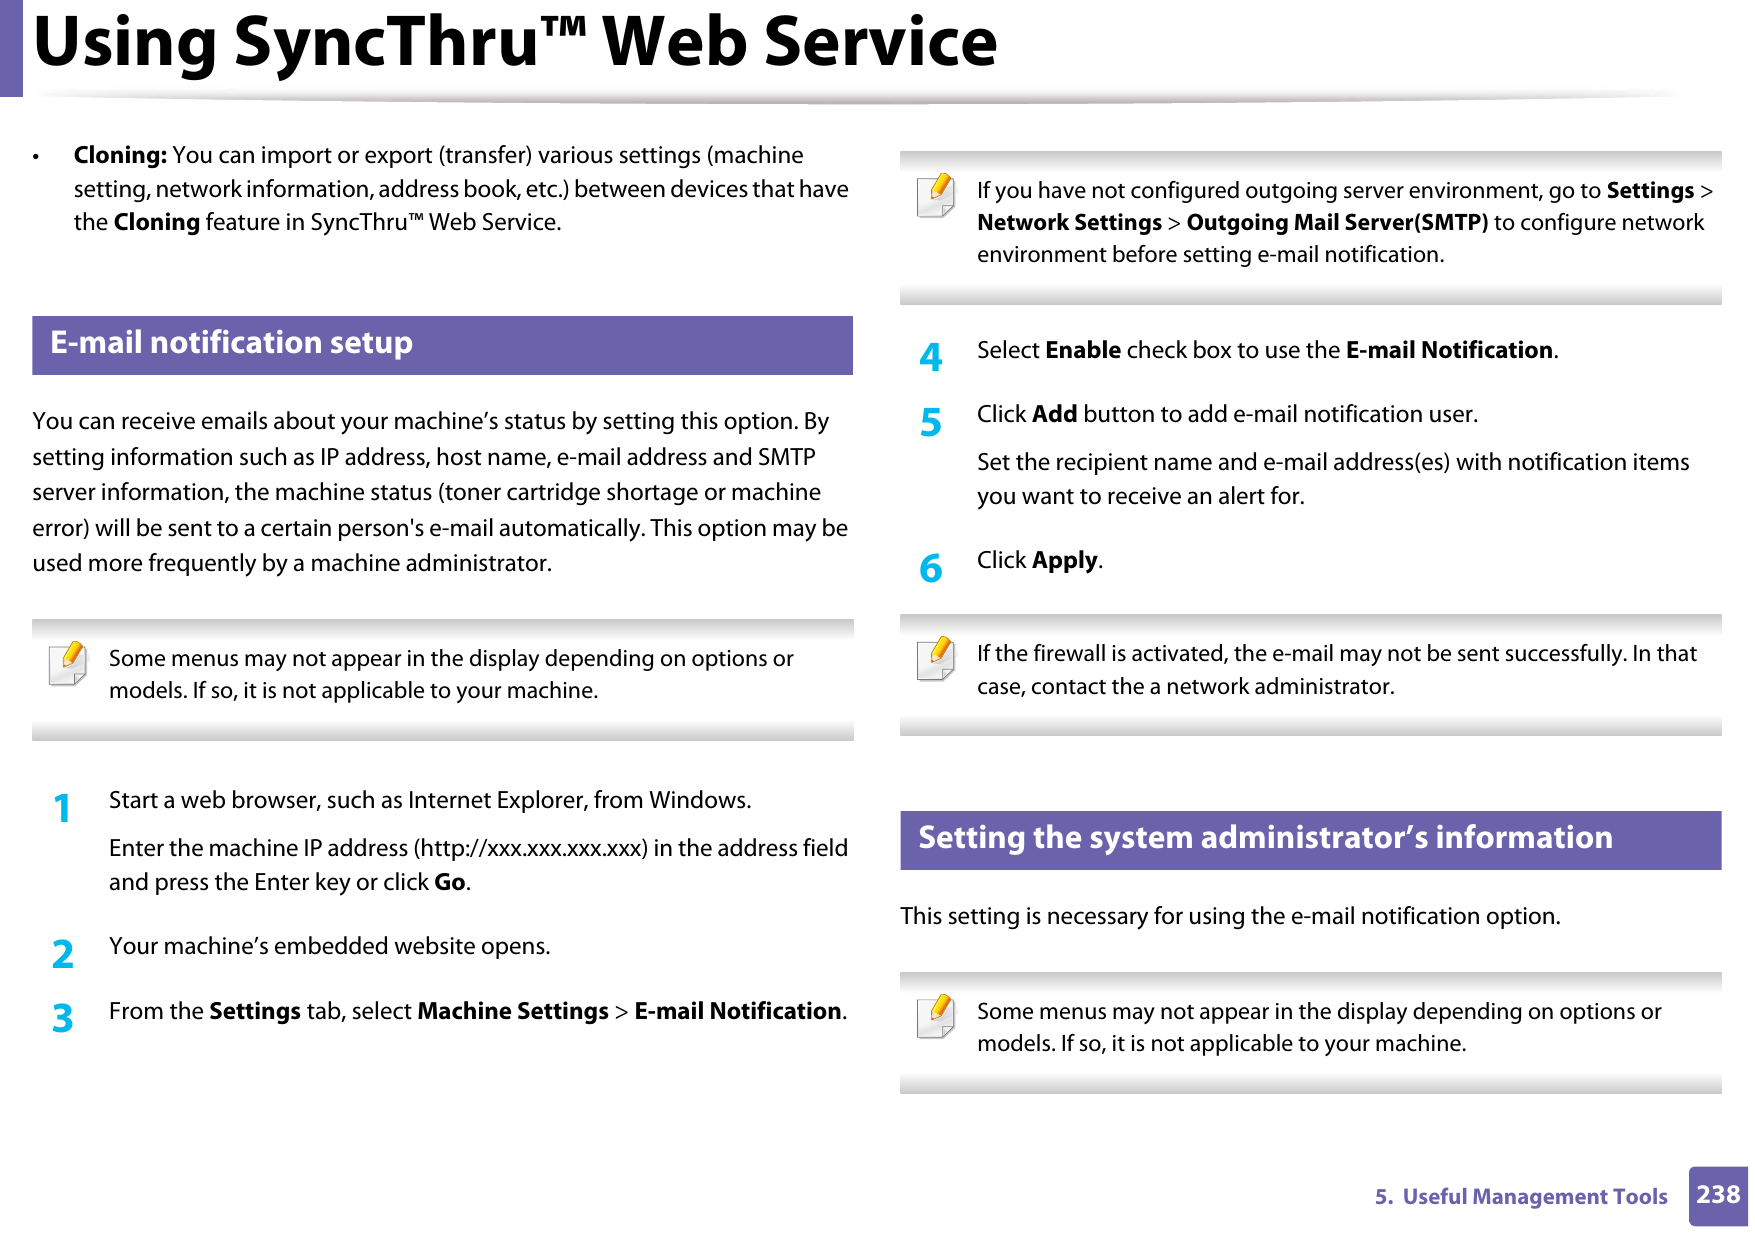 Using SyncThru™ Web Service2385.  Useful Management Tools•Cloning: You can import or export (transfer) various settings (machine setting, network information, address book, etc.) between devices that have the Cloning feature in SyncThru™ Web Service.3 E-mail notification setupYou can receive emails about your machine’s status by setting this option. By setting information such as IP address, host name, e-mail address and SMTP server information, the machine status (toner cartridge shortage or machine error) will be sent to a certain person&apos;s e-mail automatically. This option may be used more frequently by a machine administrator.  Some menus may not appear in the display depending on options or models. If so, it is not applicable to your machine. 1Start a web browser, such as Internet Explorer, from Windows.Enter the machine IP address (http://xxx.xxx.xxx.xxx) in the address field and press the Enter key or click Go.2  Your machine’s embedded website opens.3  From the Settings tab, select Machine Settings &gt; E-mail Notification.  If you have not configured outgoing server environment, go to Settings &gt; Network Settings &gt; Outgoing Mail Server(SMTP) to configure network environment before setting e-mail notification.  4  Select Enable check box to use the E-mail Notification.5  Click Add button to add e-mail notification user. Set the recipient name and e-mail address(es) with notification items you want to receive an alert for.6  Click Apply. If the firewall is activated, the e-mail may not be sent successfully. In that case, contact the a network administrator. 4 Setting the system administrator’s informationThis setting is necessary for using the e-mail notification option. Some menus may not appear in the display depending on options or models. If so, it is not applicable to your machine. 